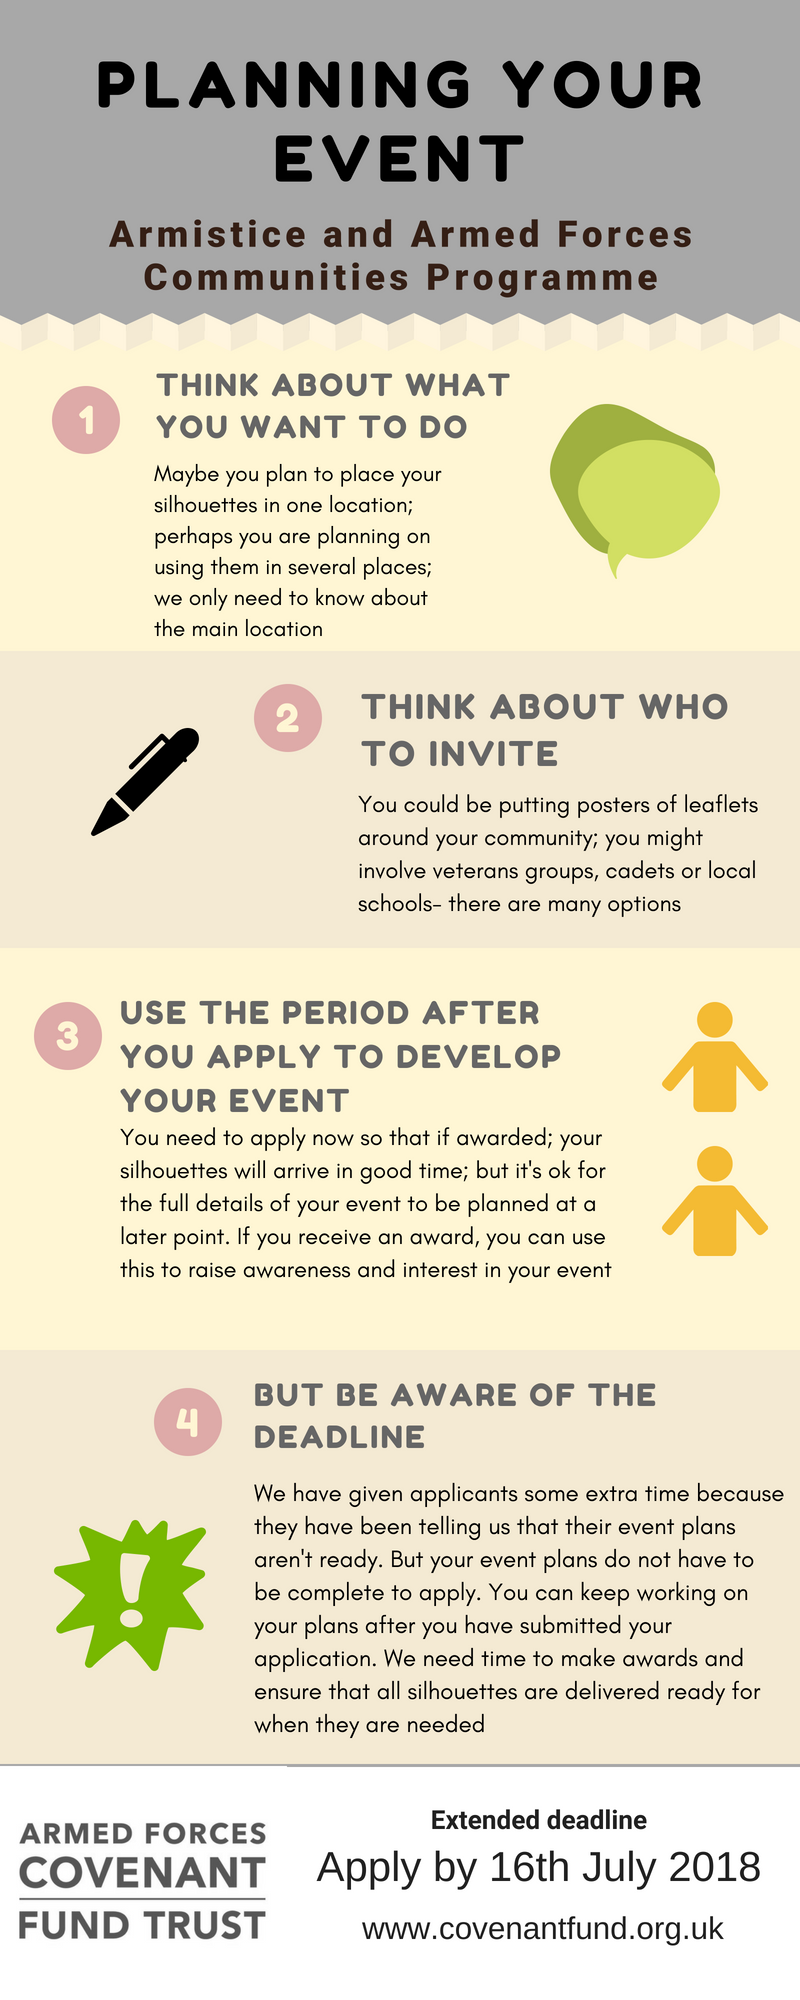 Steps to planning an event 1) think about what you want to do; 2) Think about who to invite; 3) Use the period after you apply to develop your event; 4) But be aware of the deadline